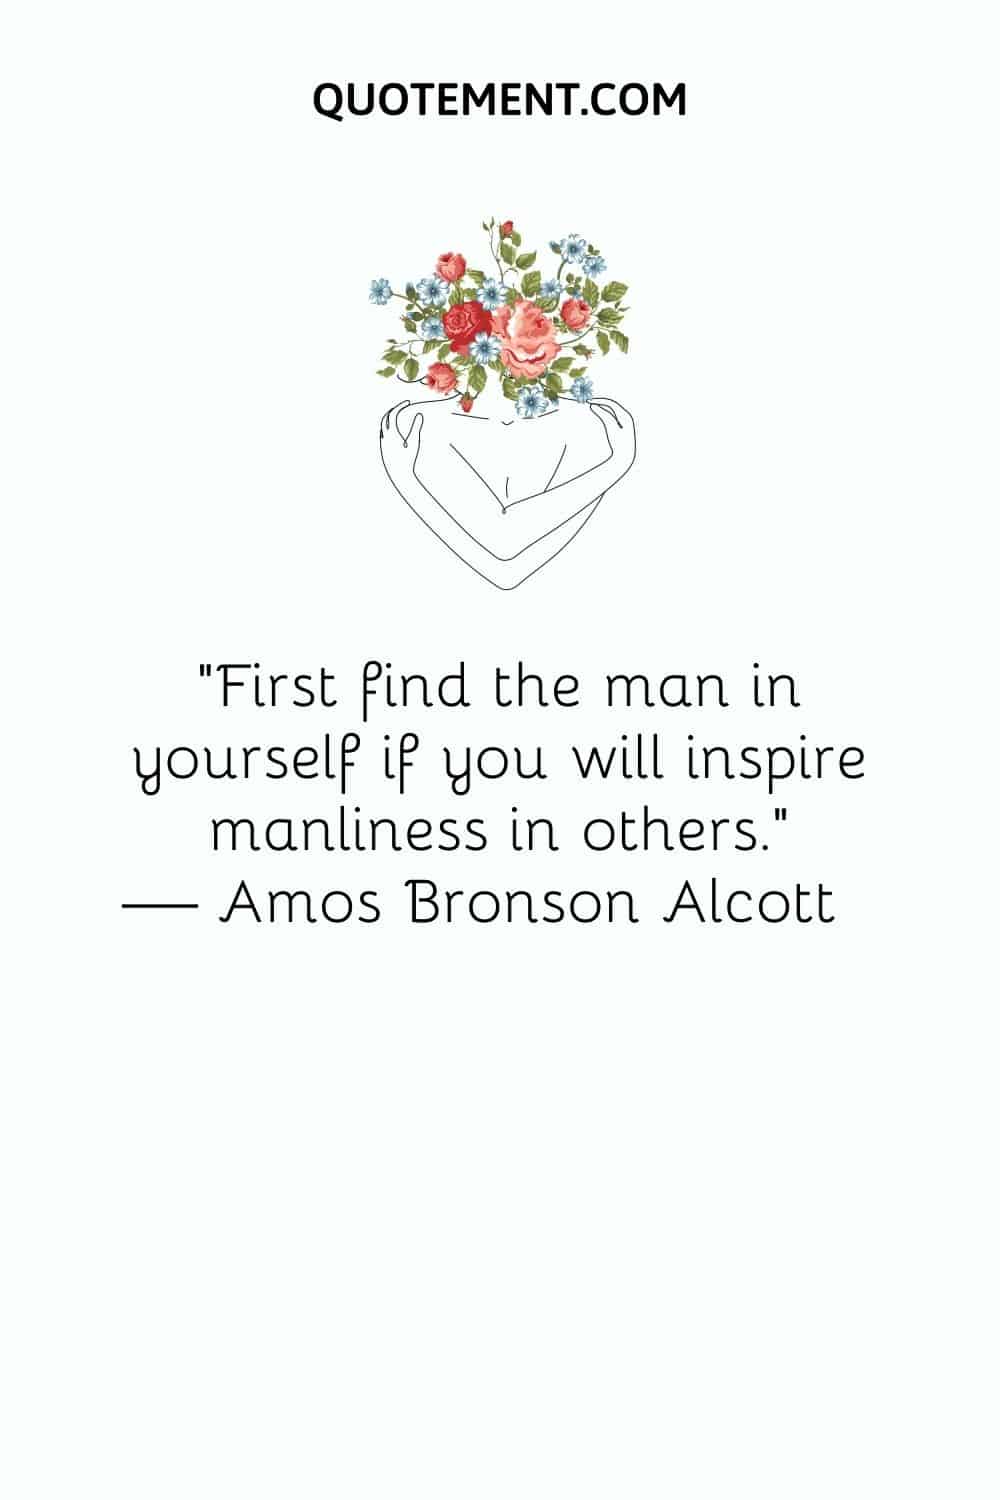 First find the man in yourself if you will inspire manliness in others